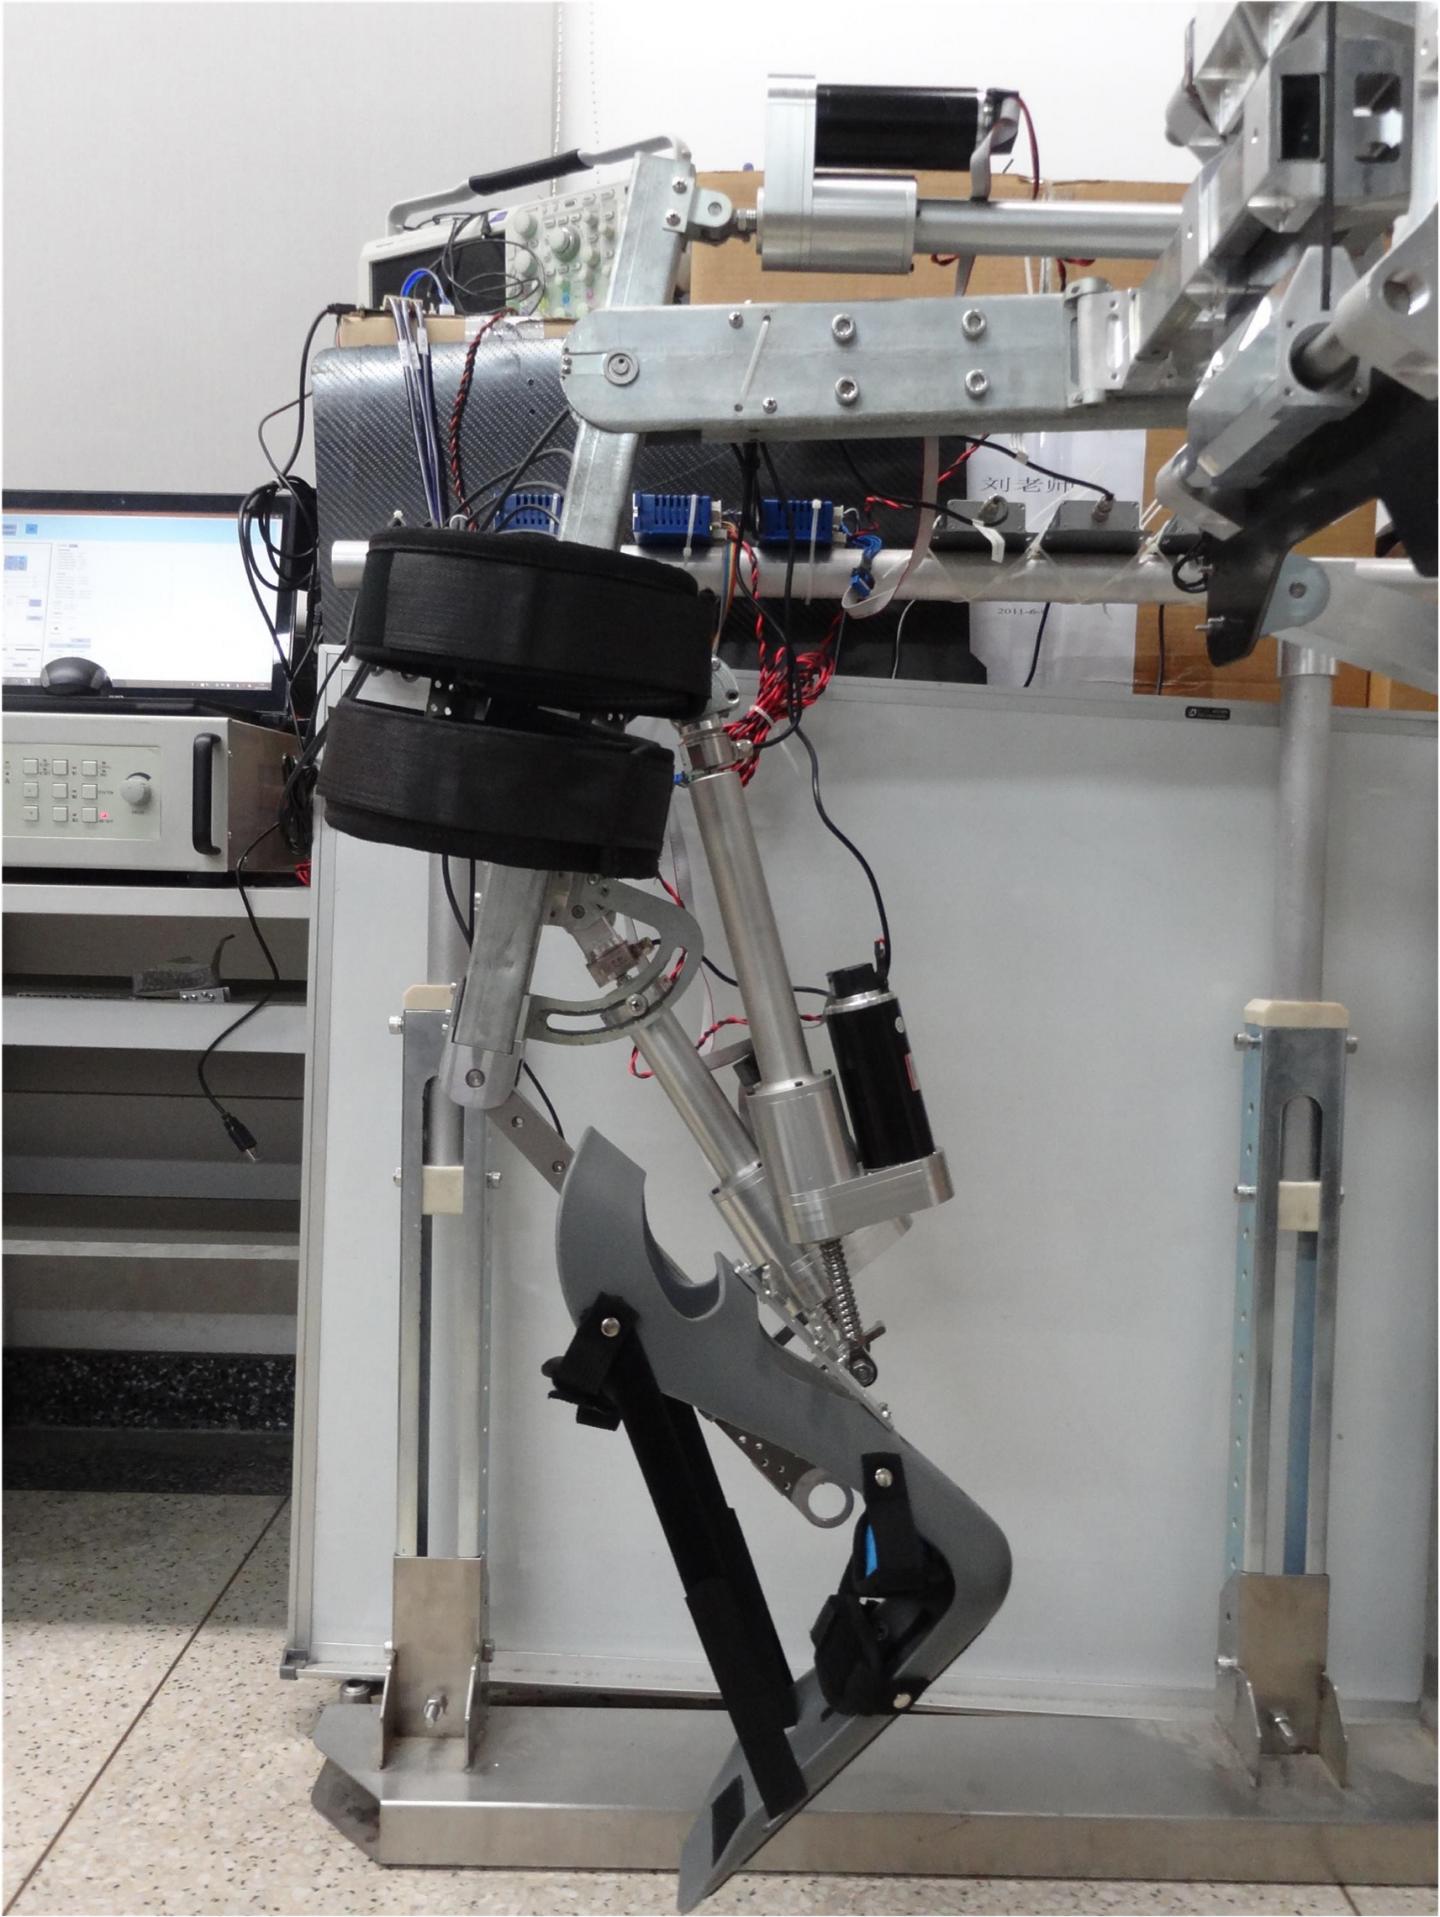 A Prototype of the Lower-Limb Exoskeleton Being Developed at Beihang University in Beijing, China